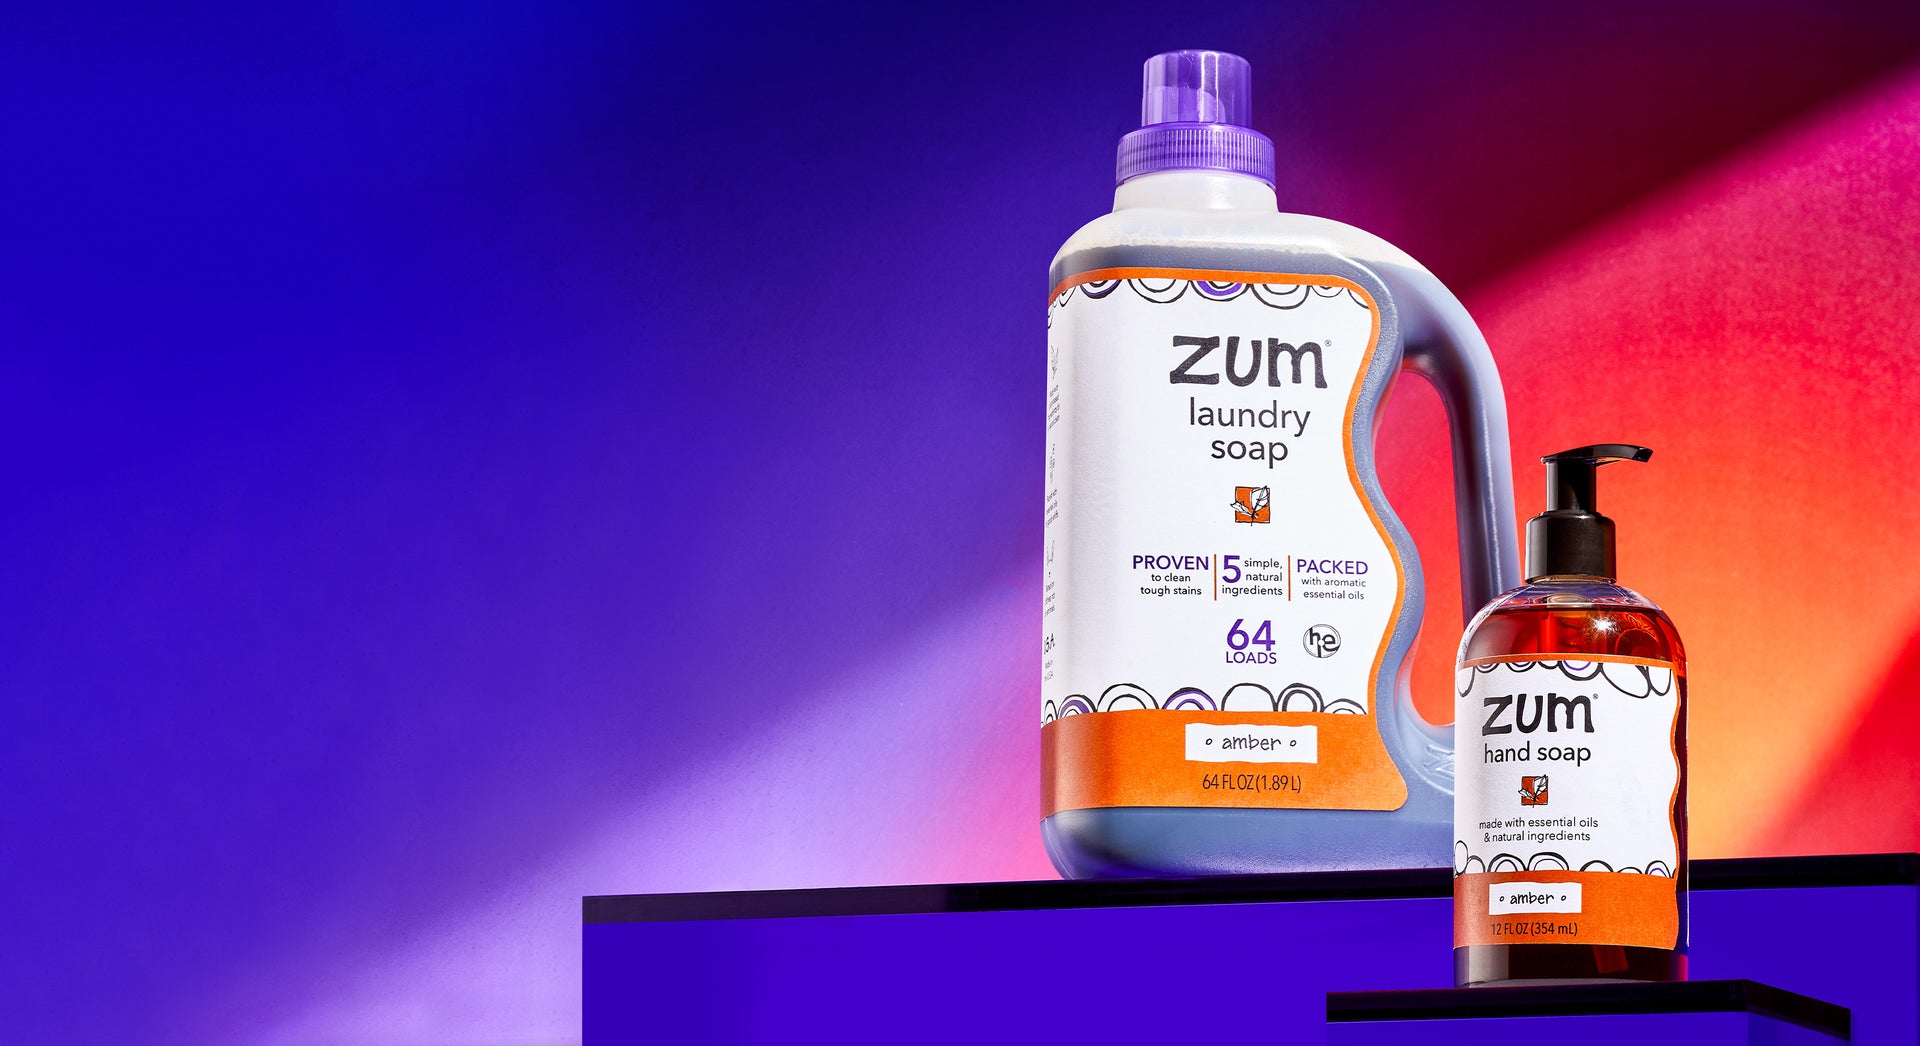 Amber scented 64 fl. oz. Laundry Soap battle and Hand Soap bottle with a pump on purple risers. Blue to purple to orange gradient background.